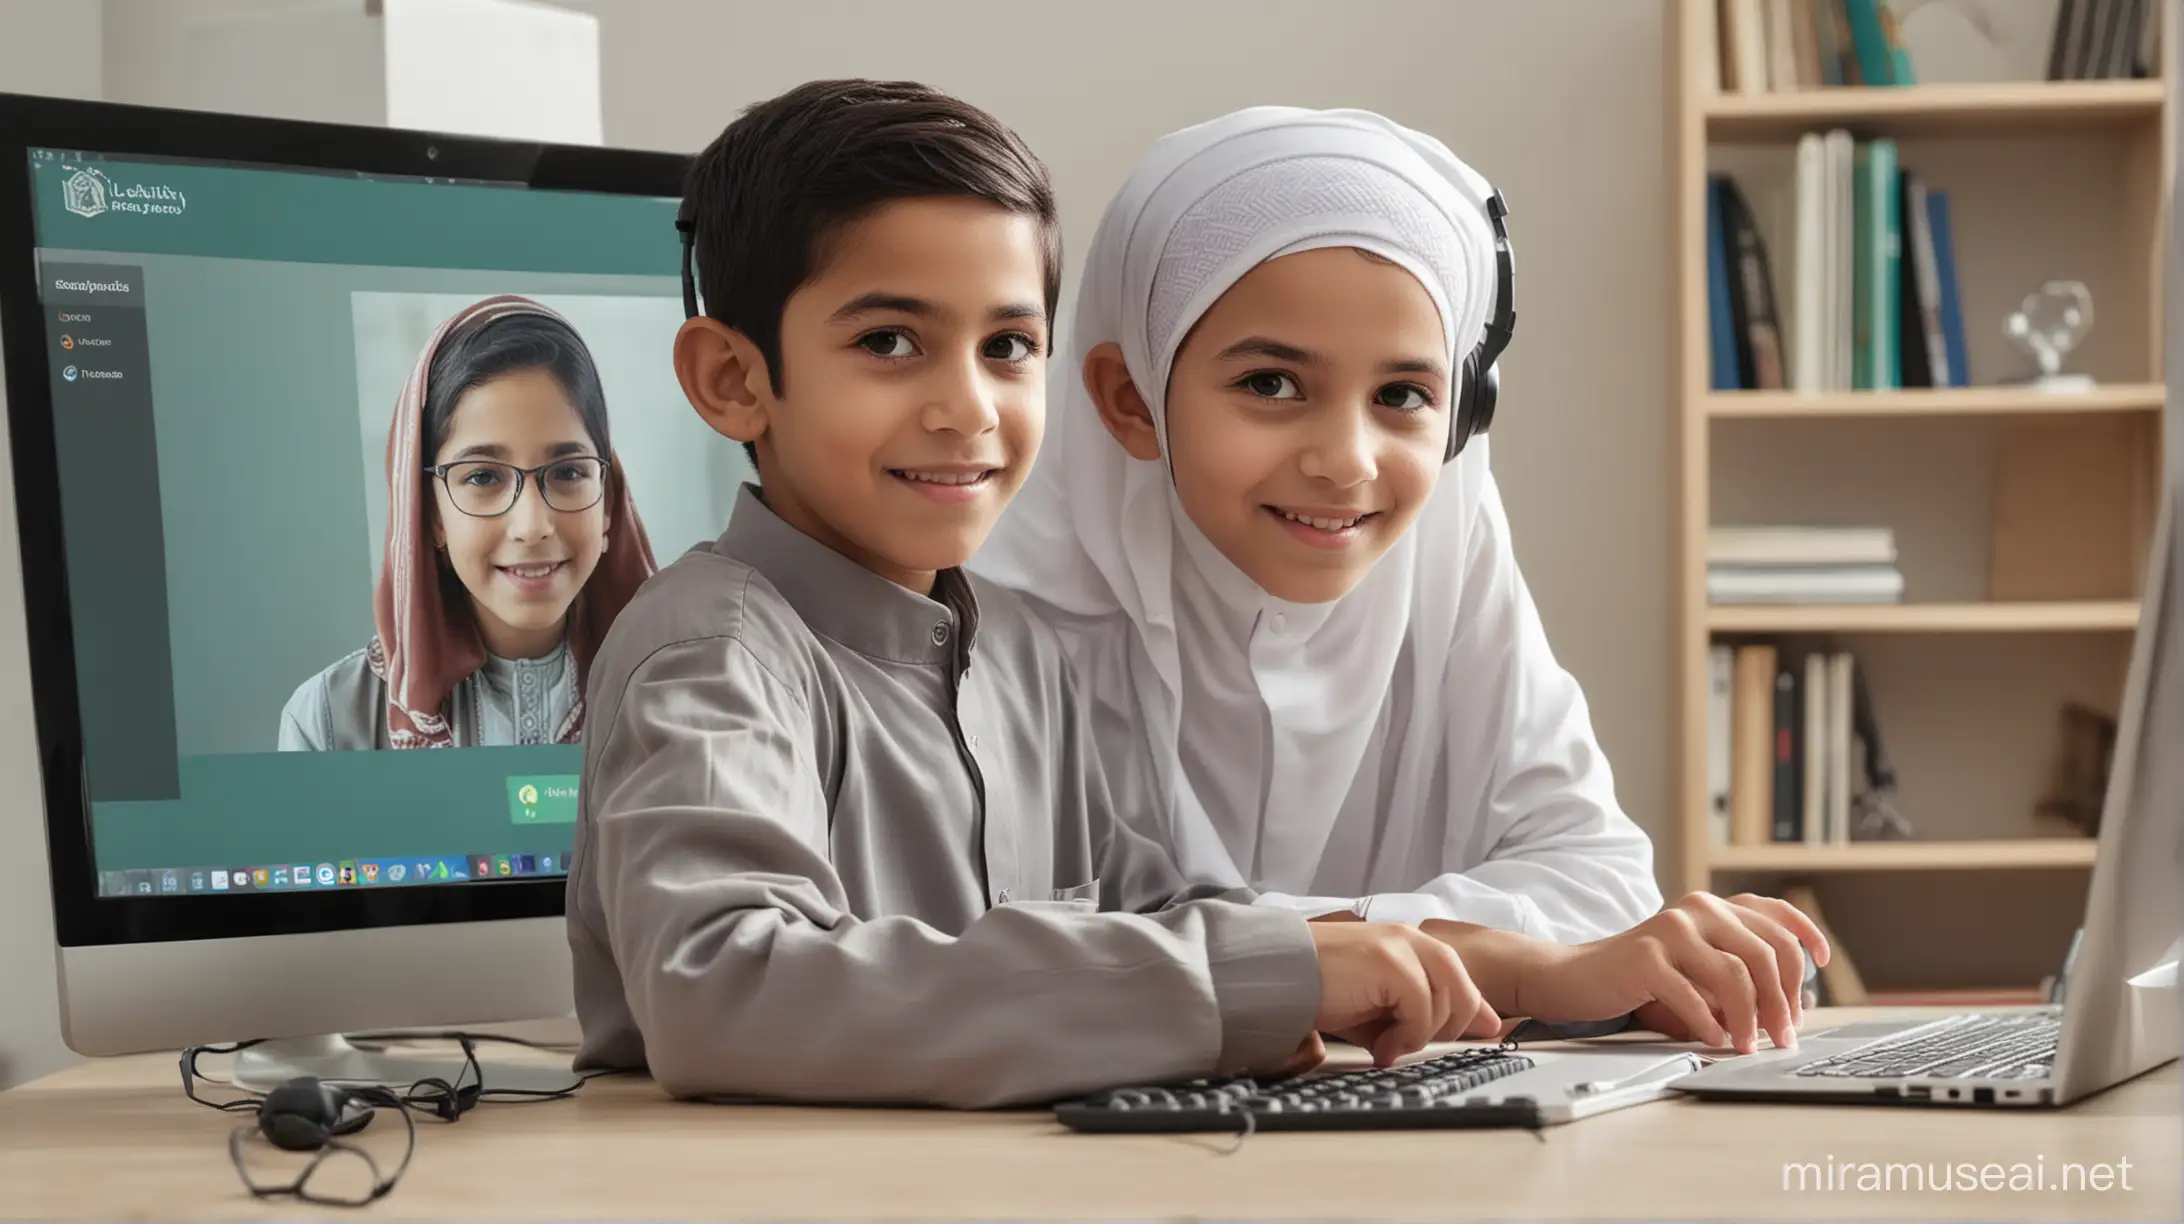 Muslim Boy Engaged in Online Learning with Teacher on Computer Screen